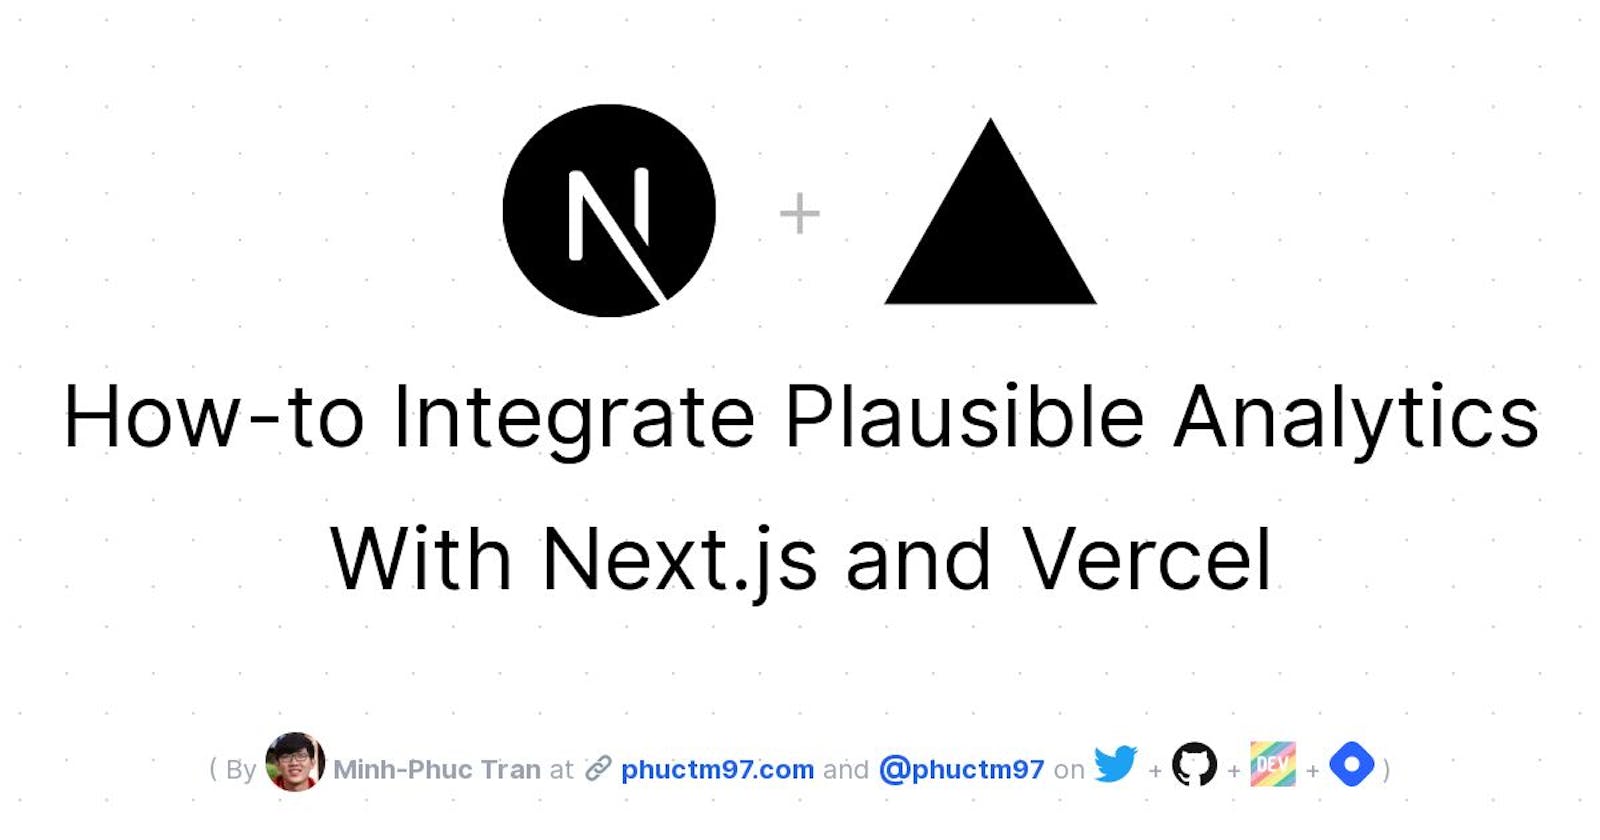 How-to Integrate Plausible Analytics With Next.js and Vercel